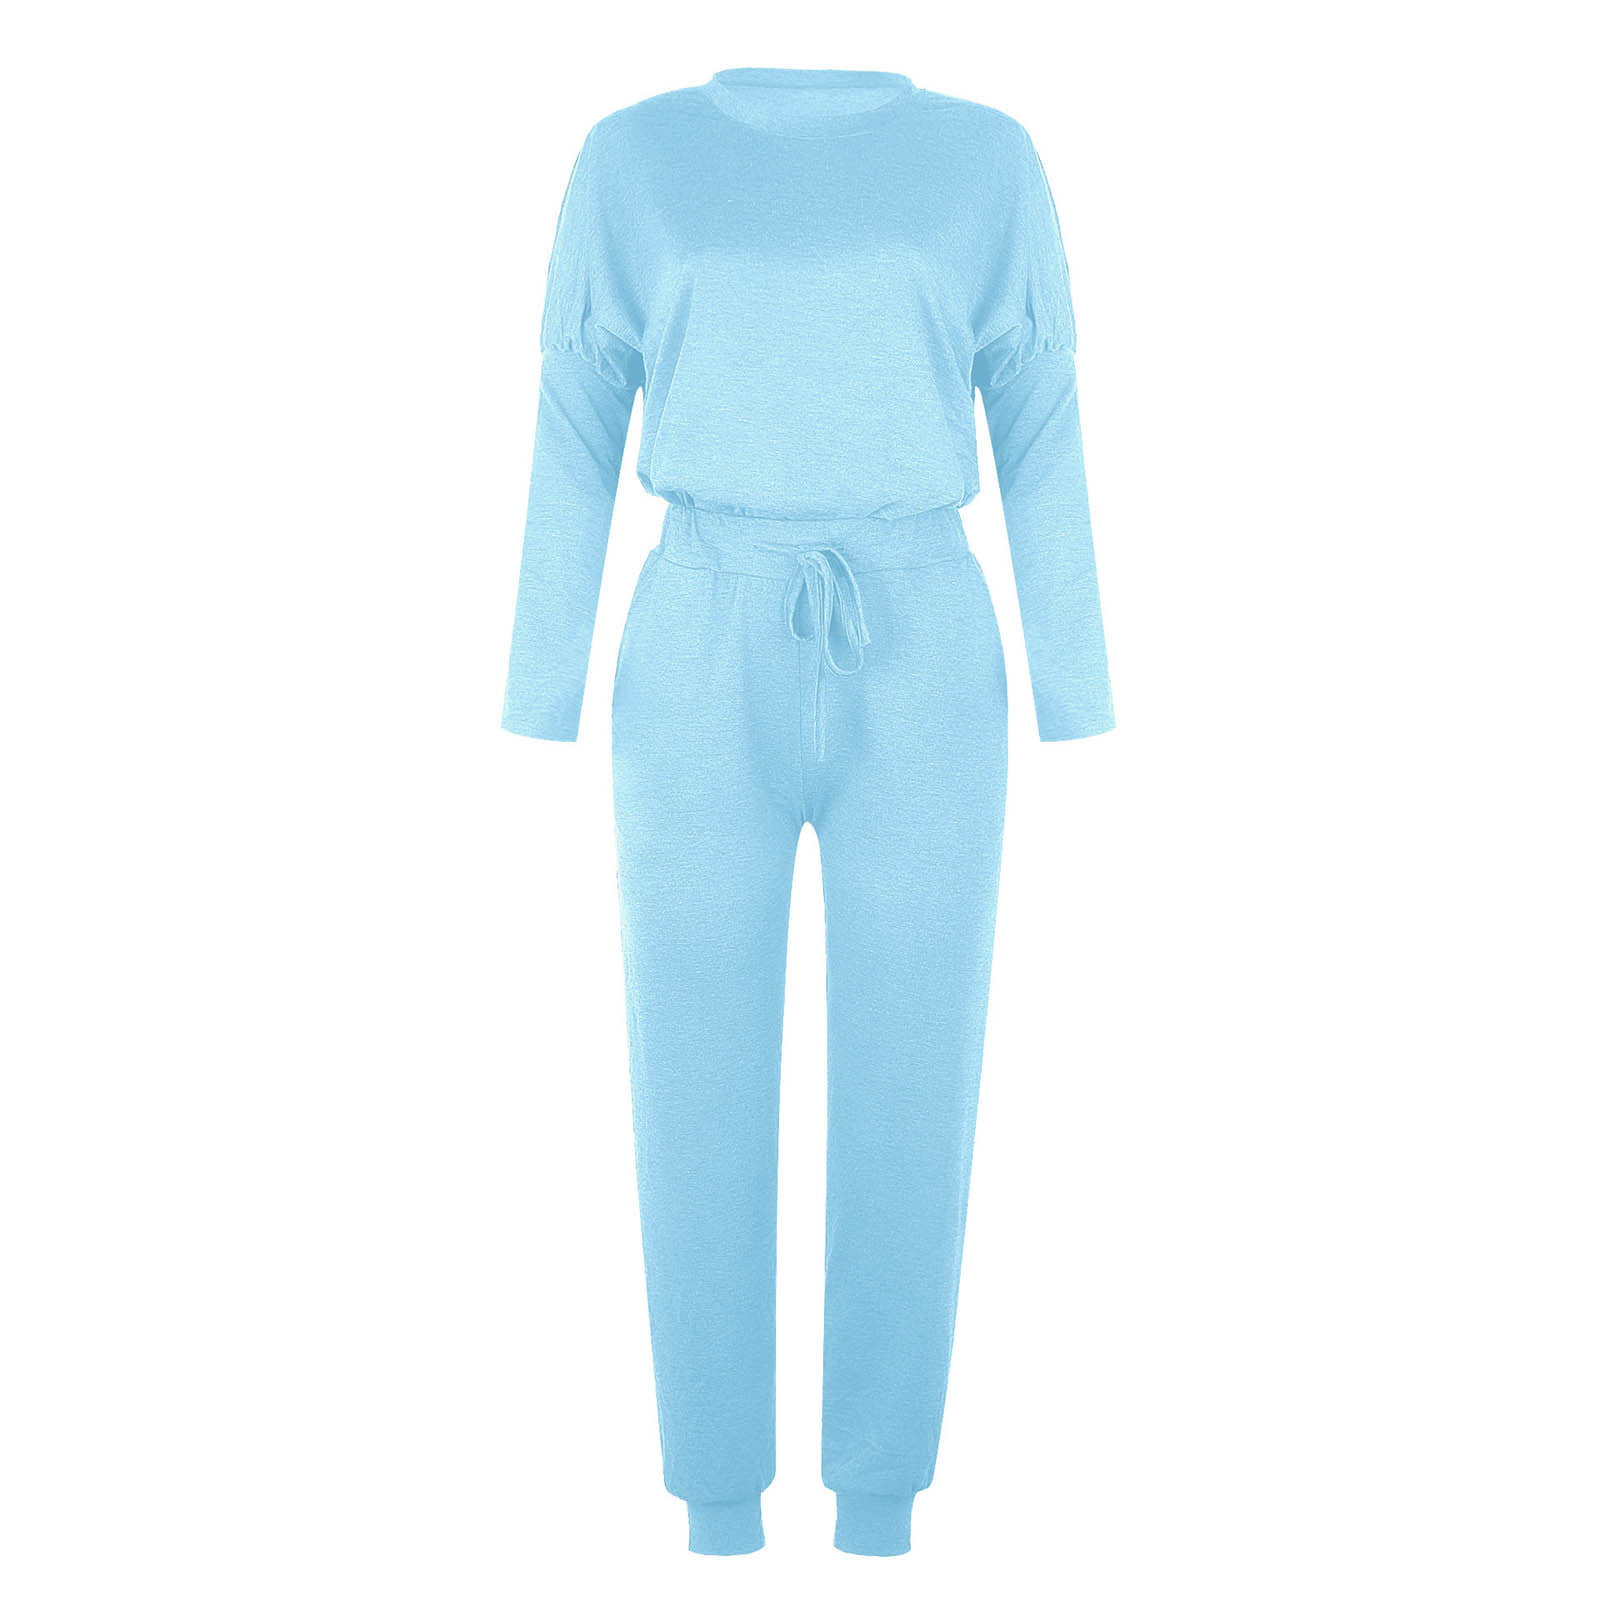 Bomotoo Women Jogger Set Jacket And Shorts Two Piece Outfit Long Sleeve  Sweatsuits Regular Tracksuit Sets Fitness Sky Blue XL 